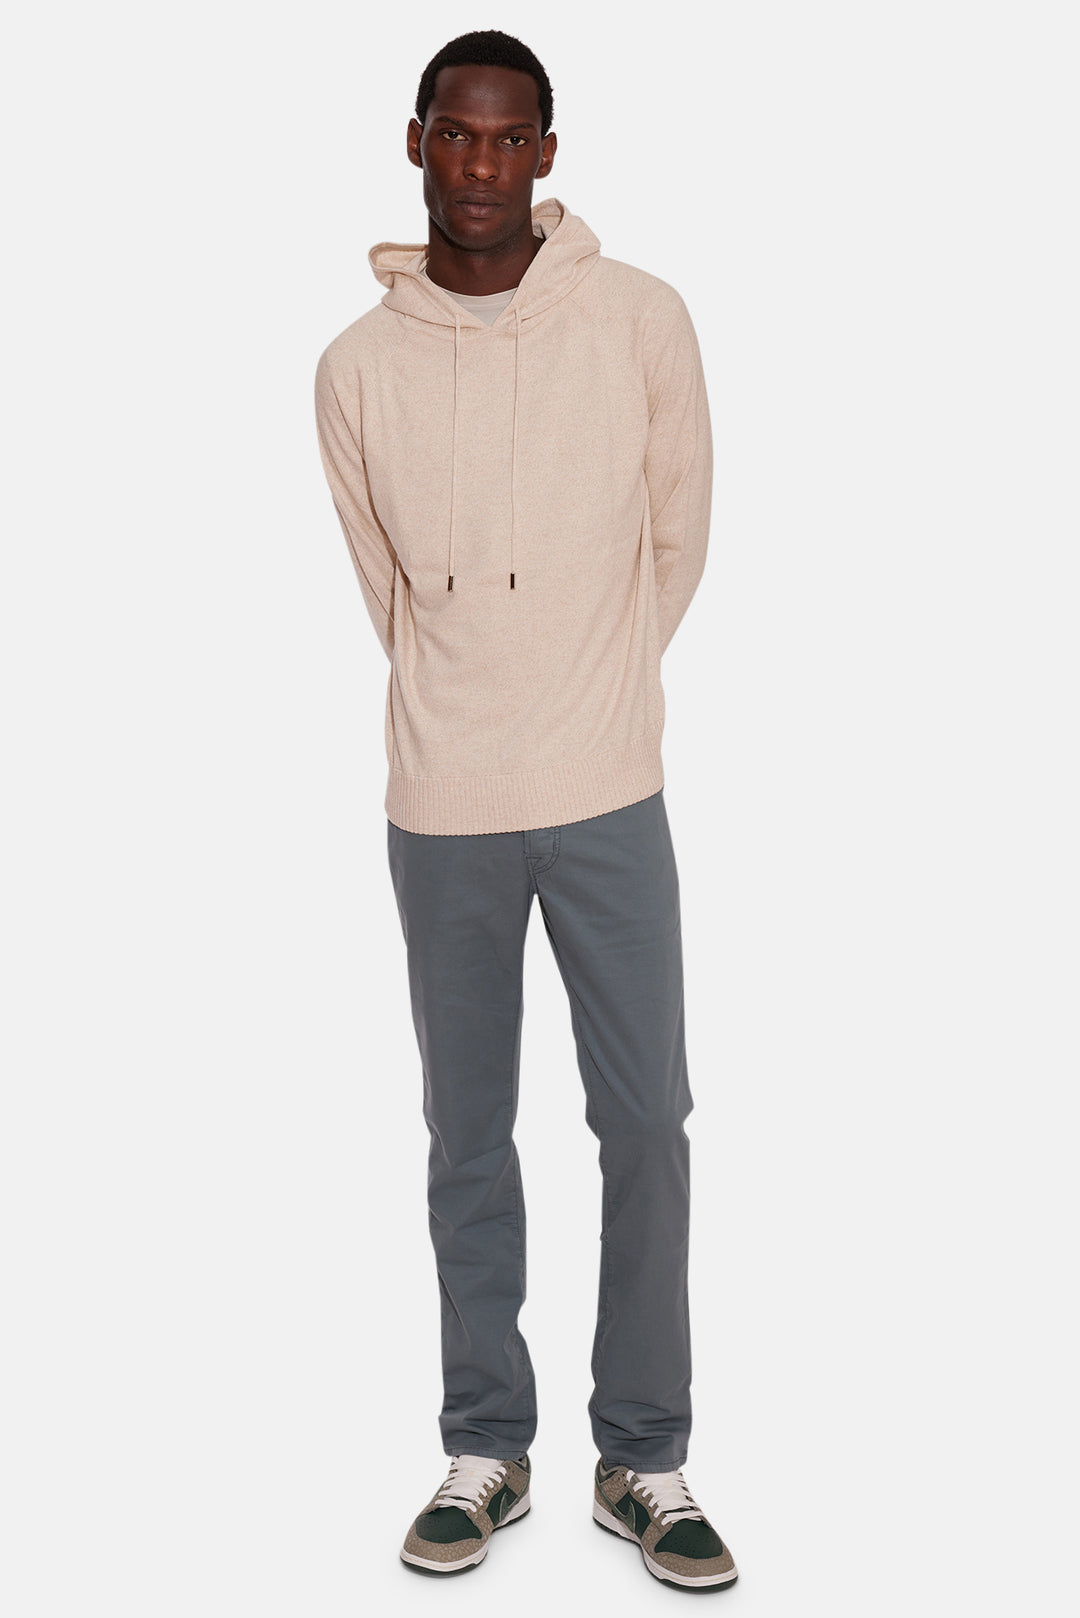 Reade Pullover Hoodie Tallow